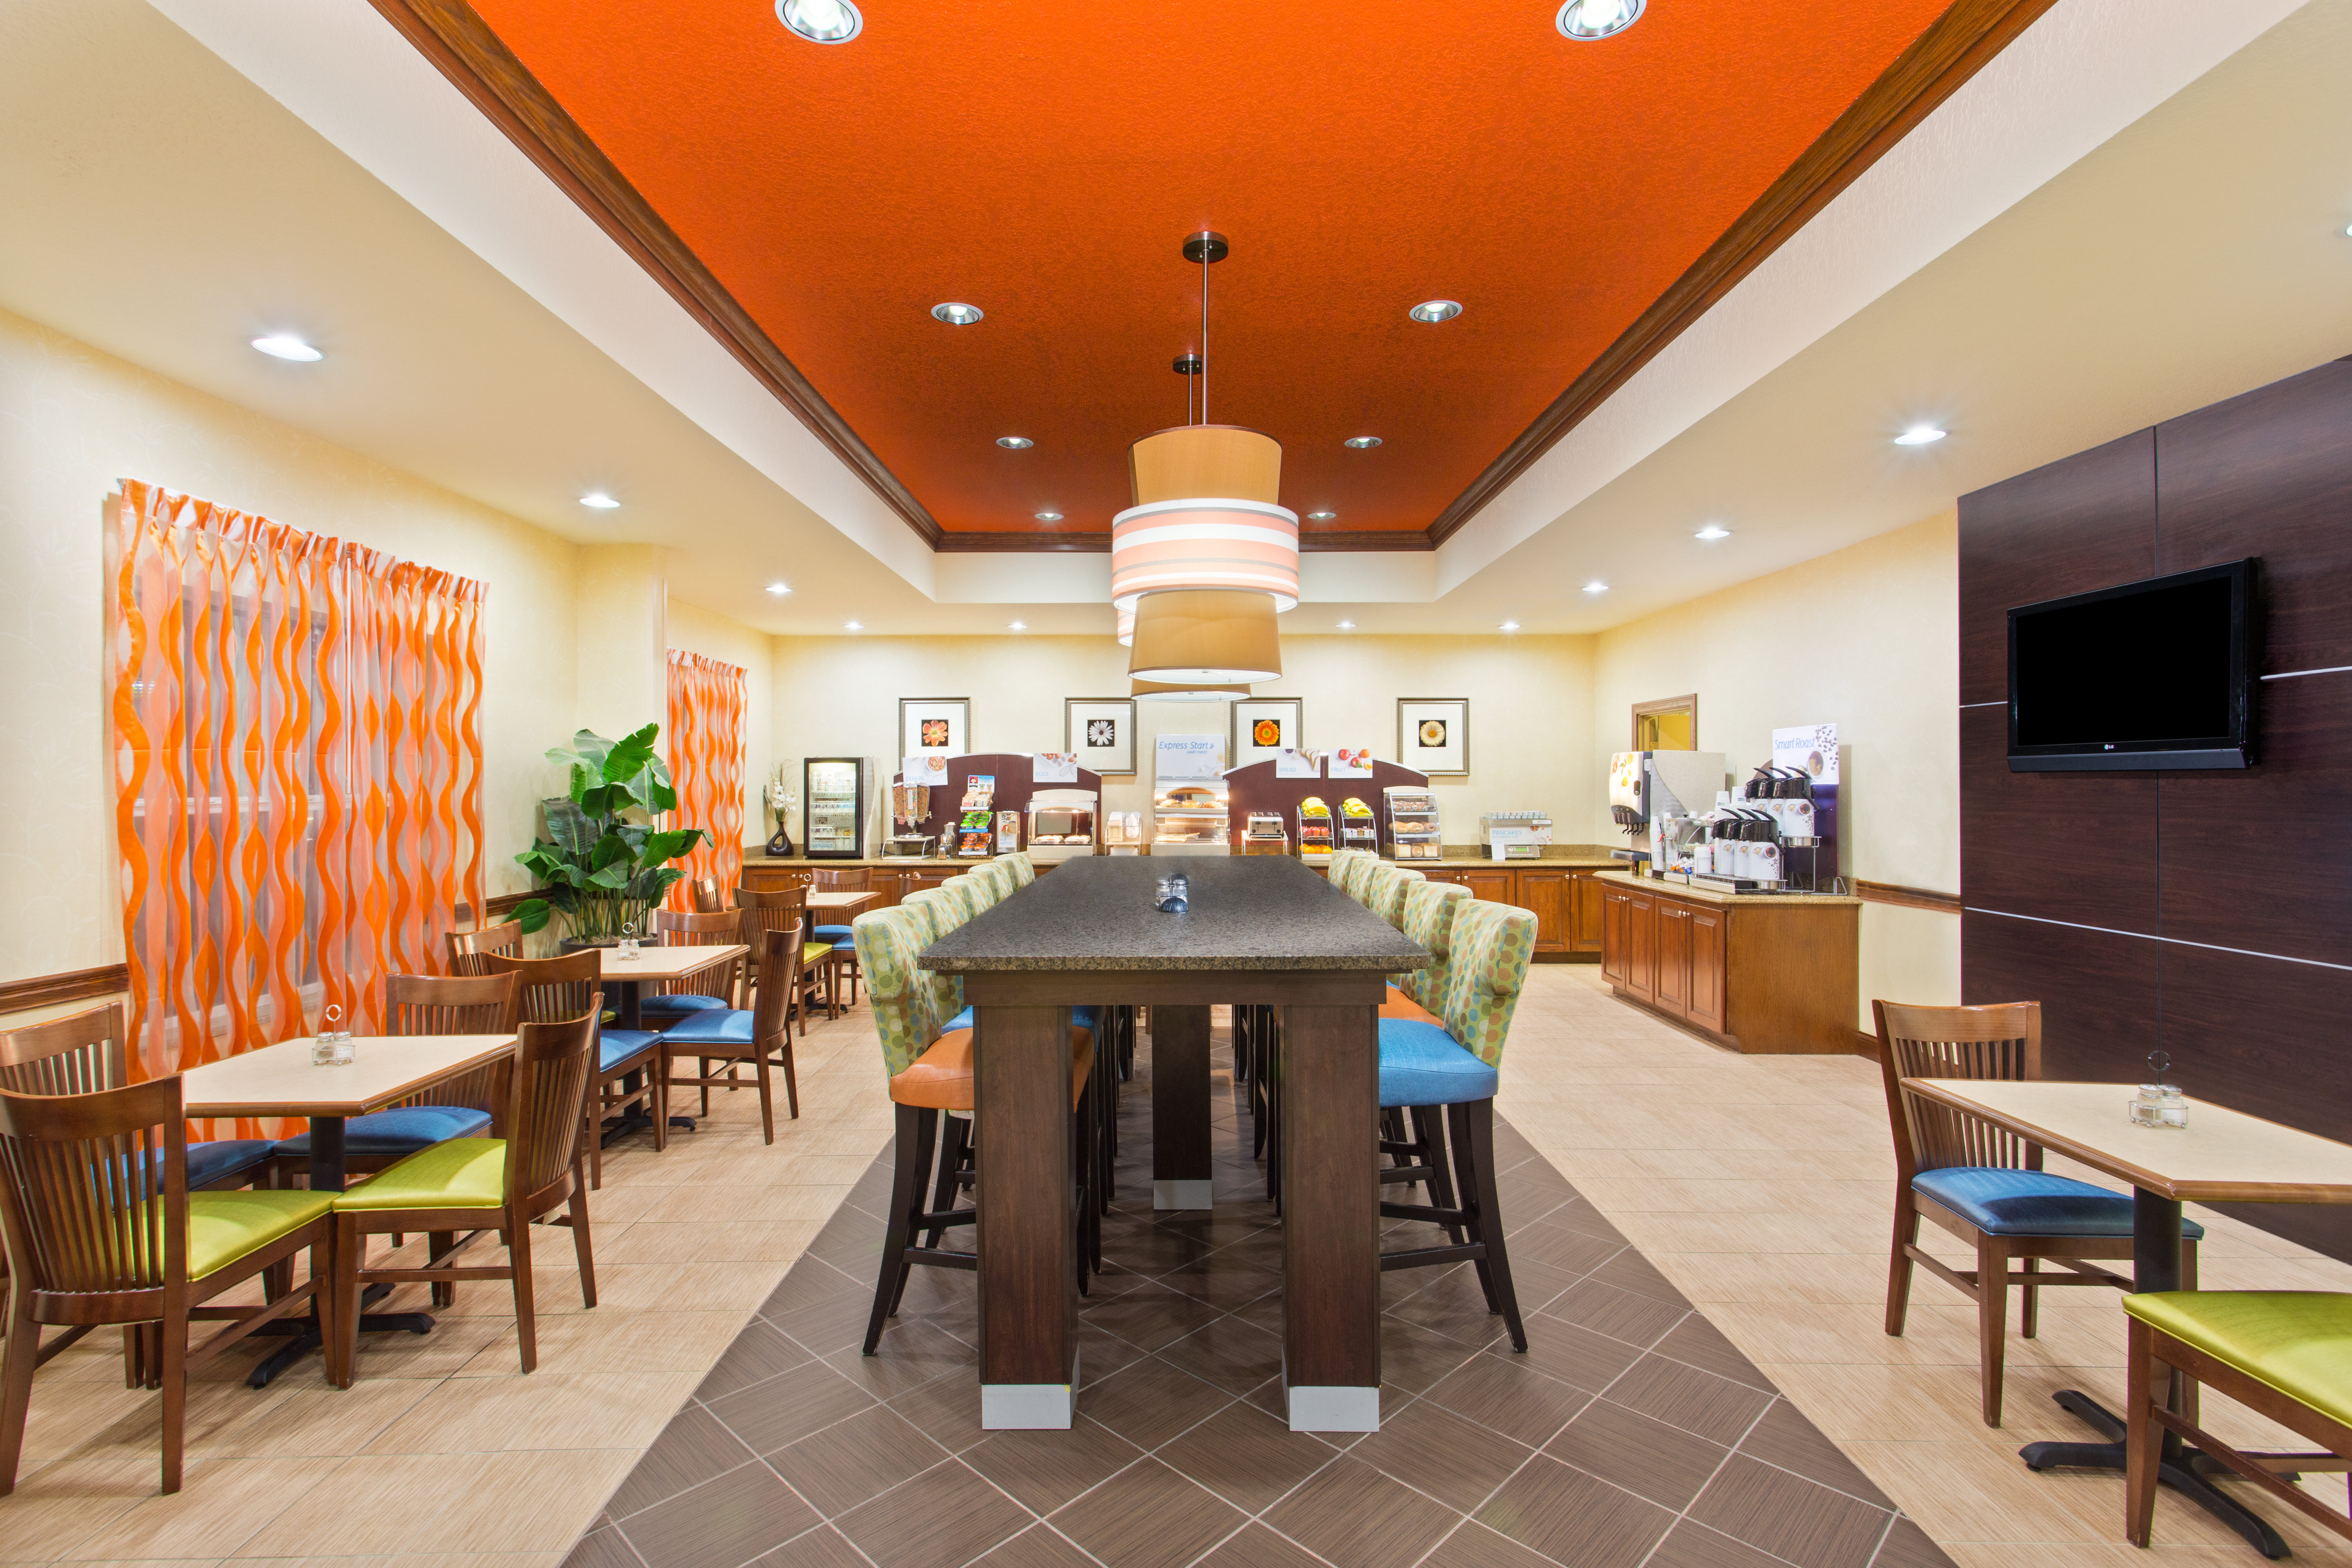 A perfect area for dining, socializing and having meetings.